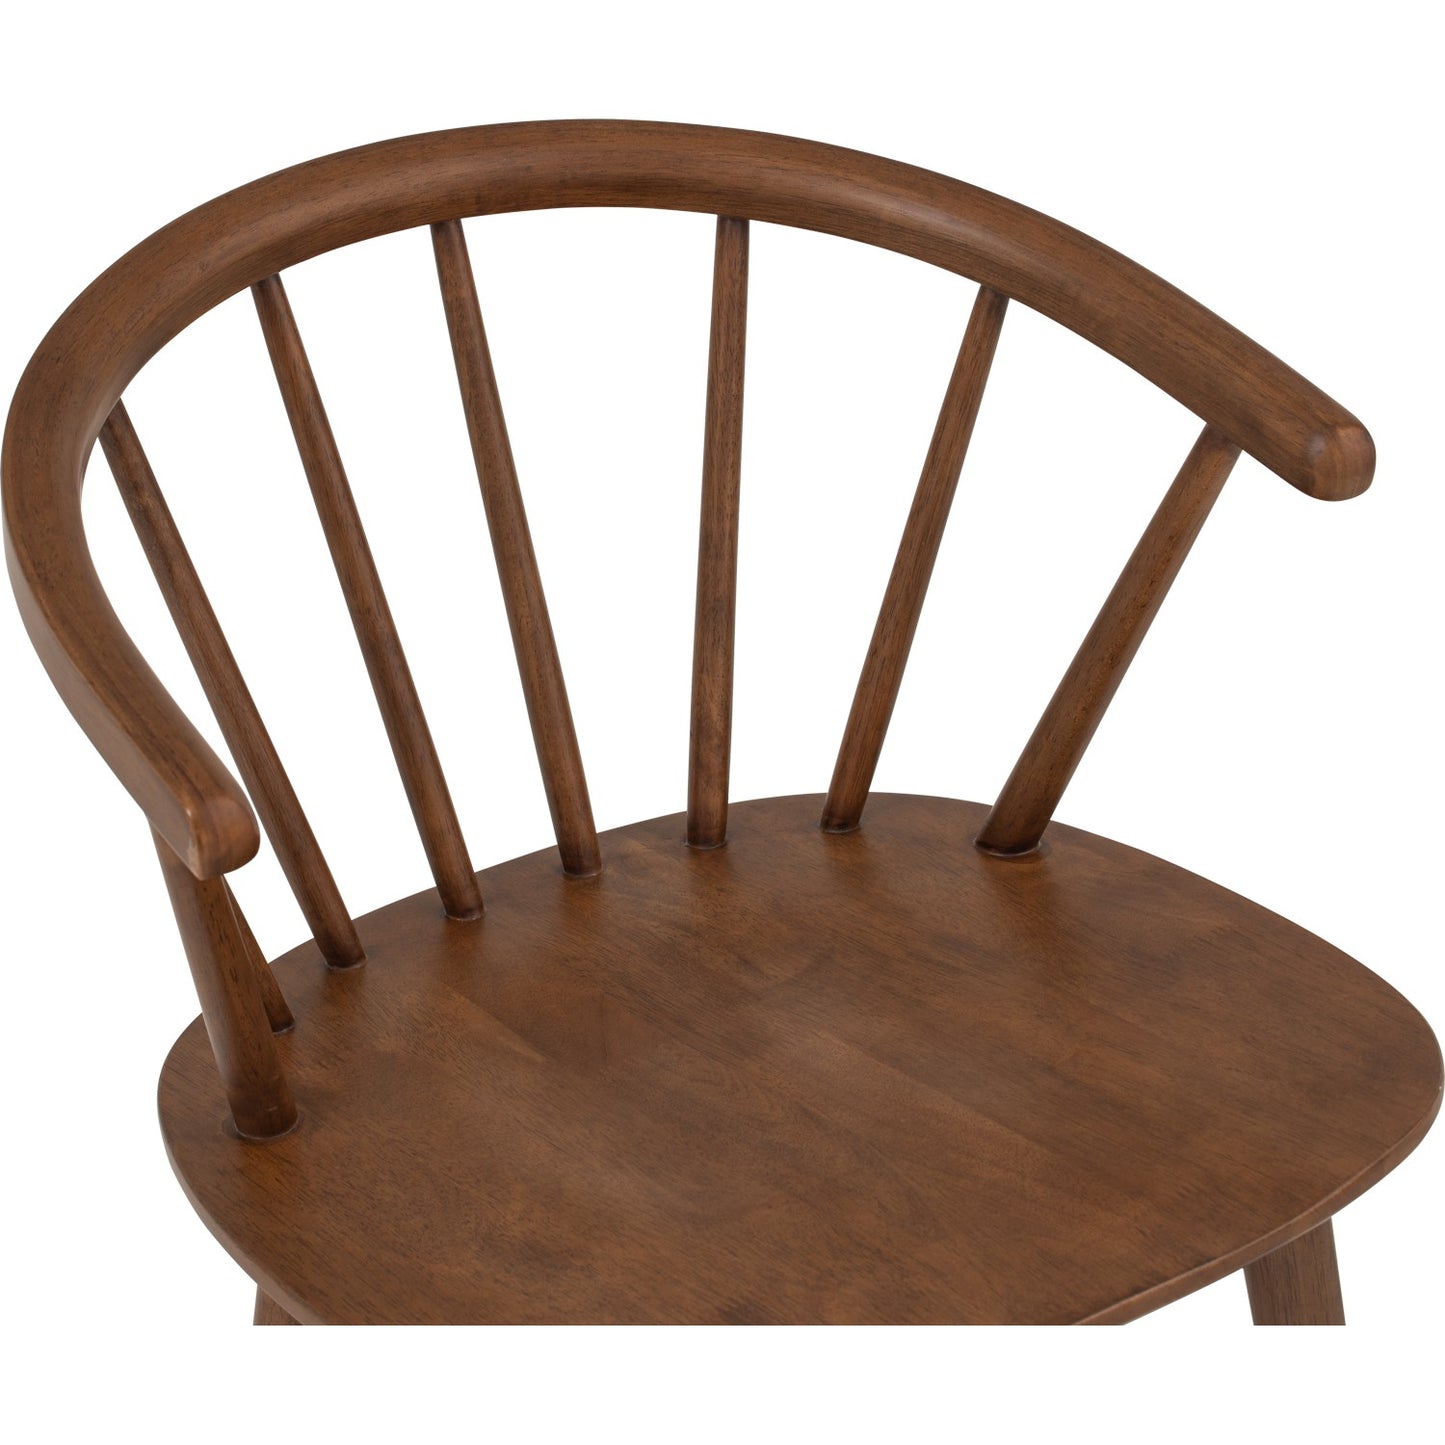 CALEY COUNTER CHAIR 109